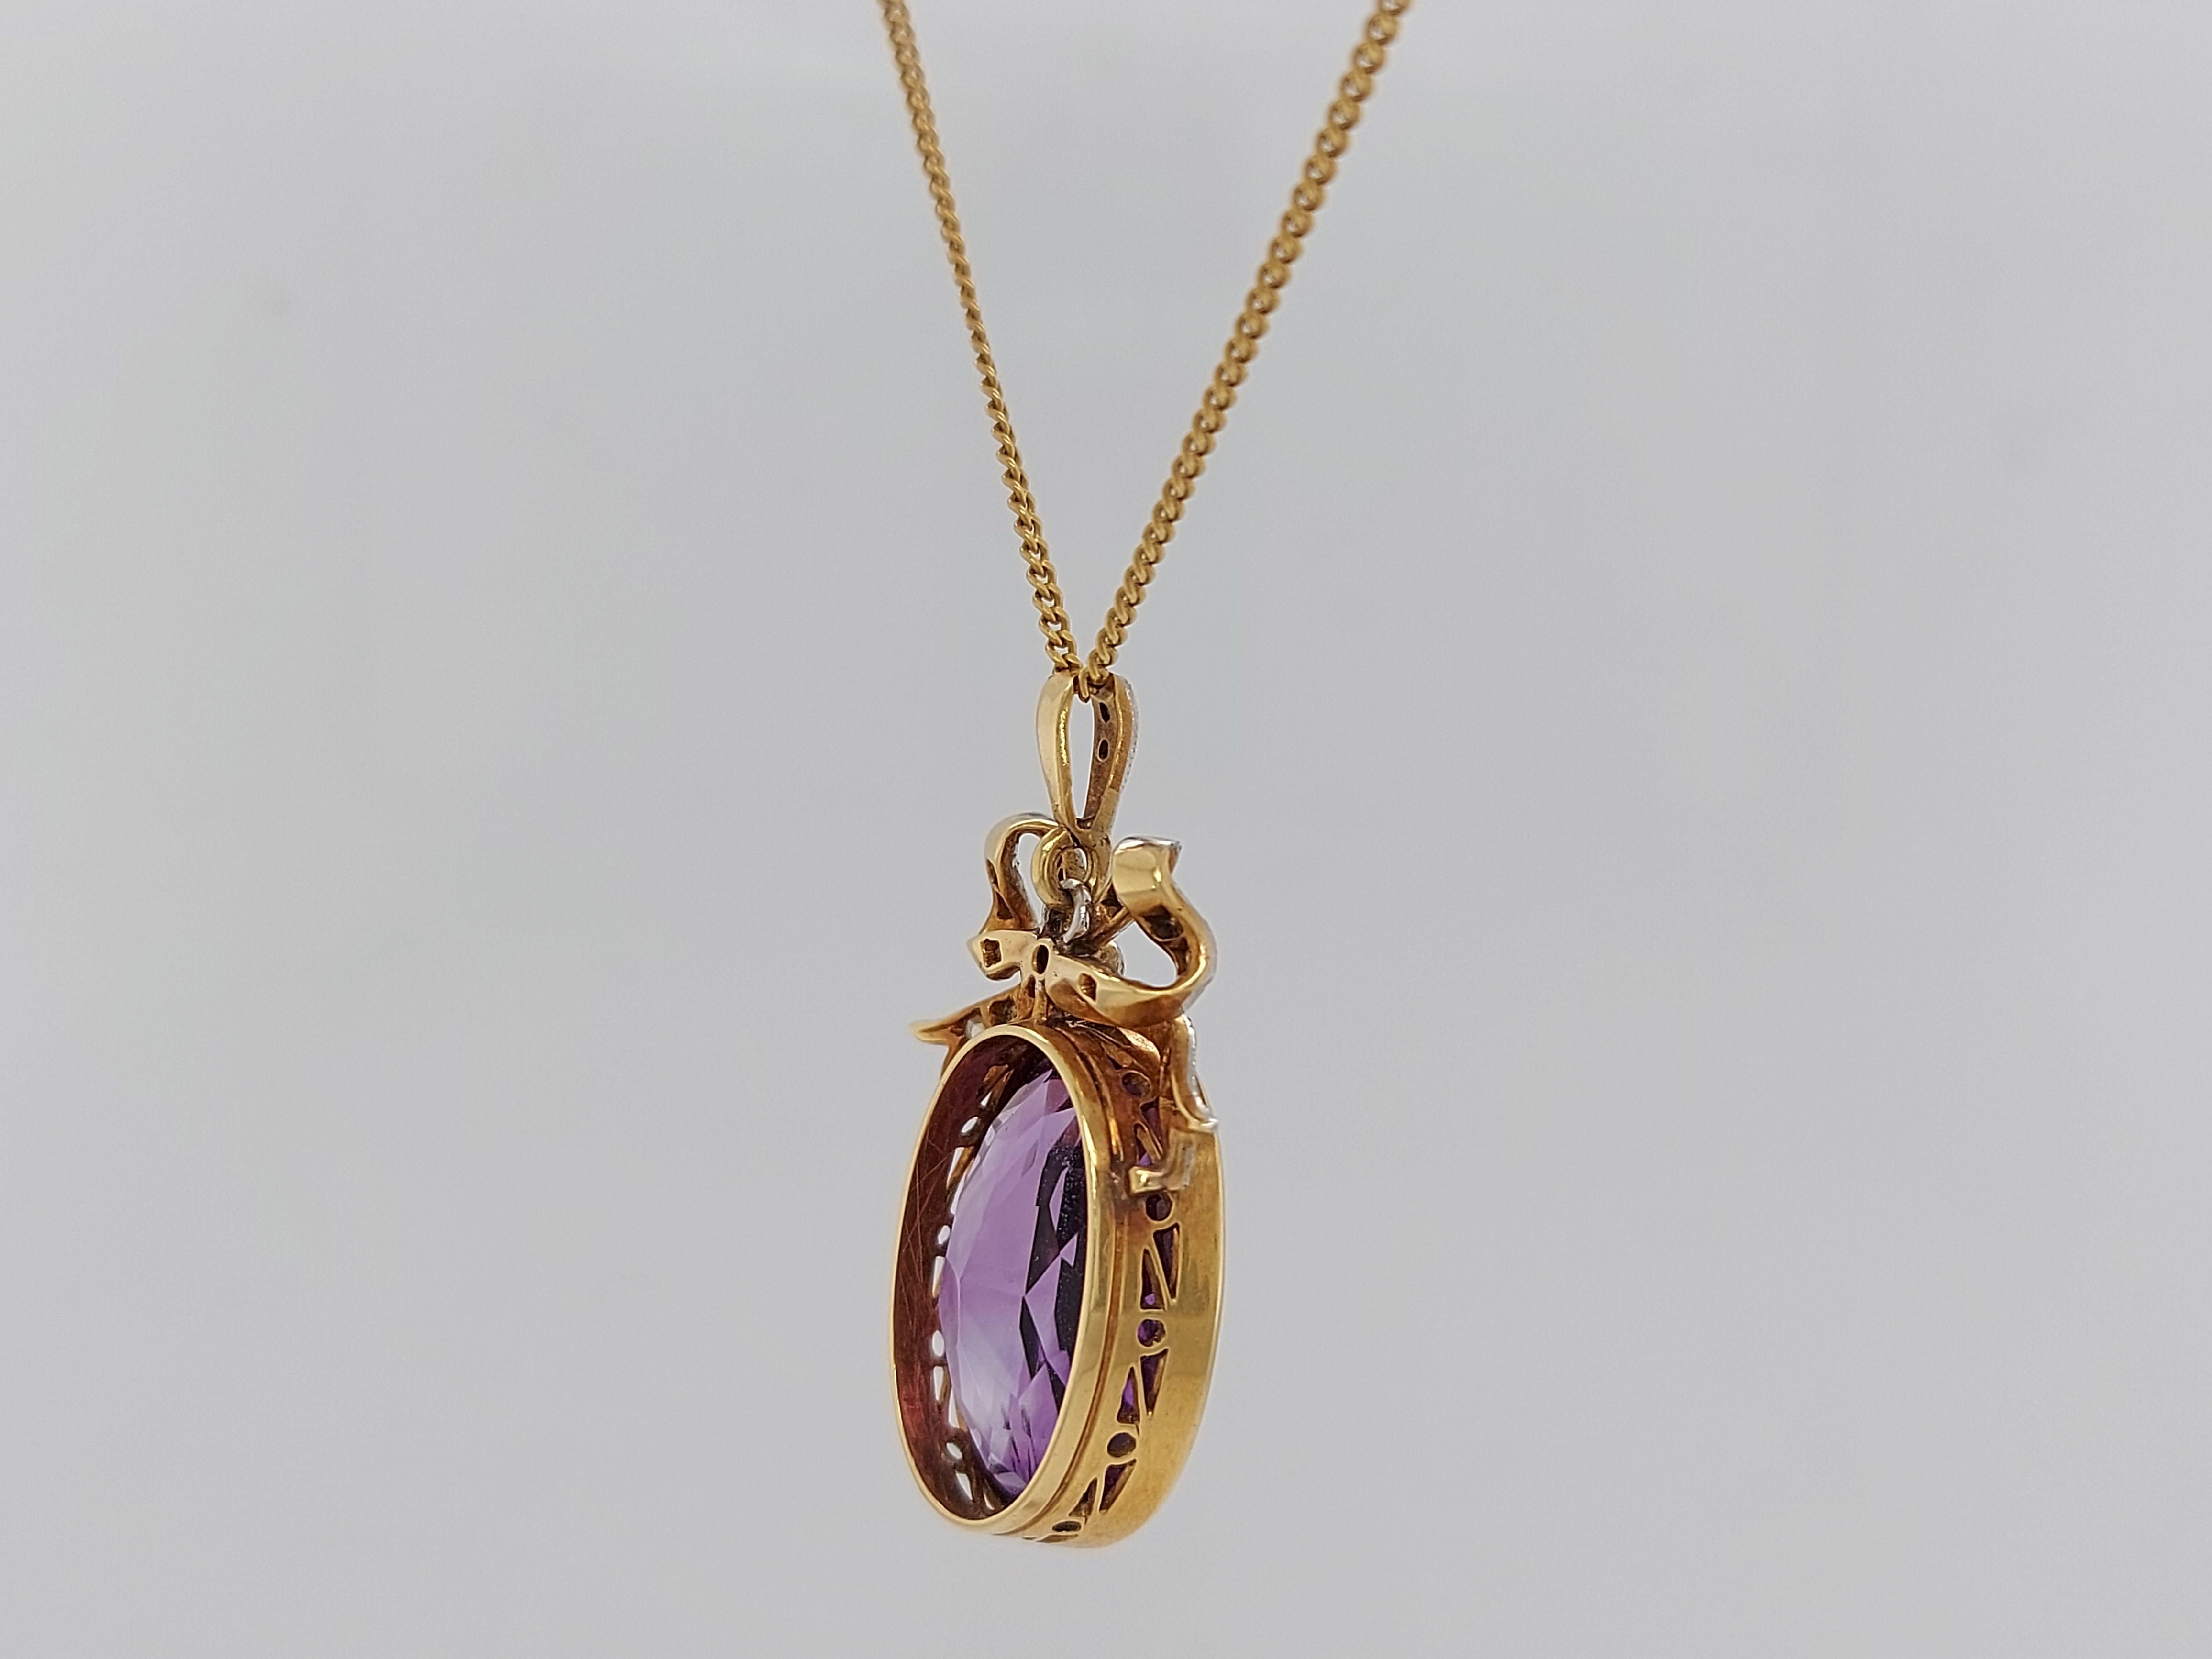 Vintage Yellow Gold Pendant Necklace with Amethyst and Rose Cut Diamonds For Sale 5